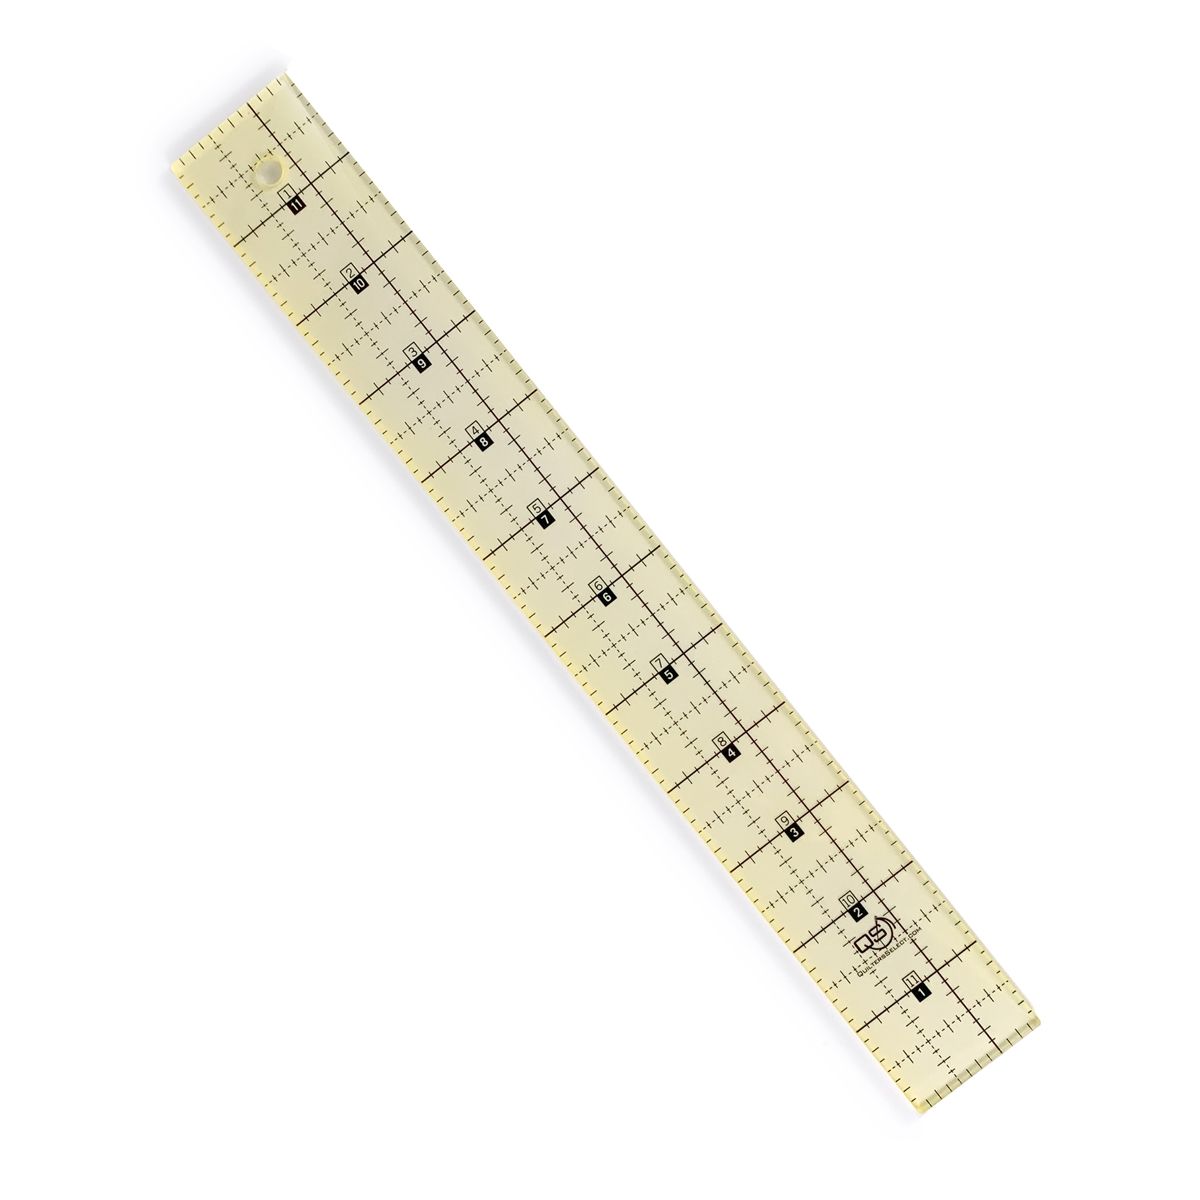 Quilters Select Ruler 1.5” x 12” 